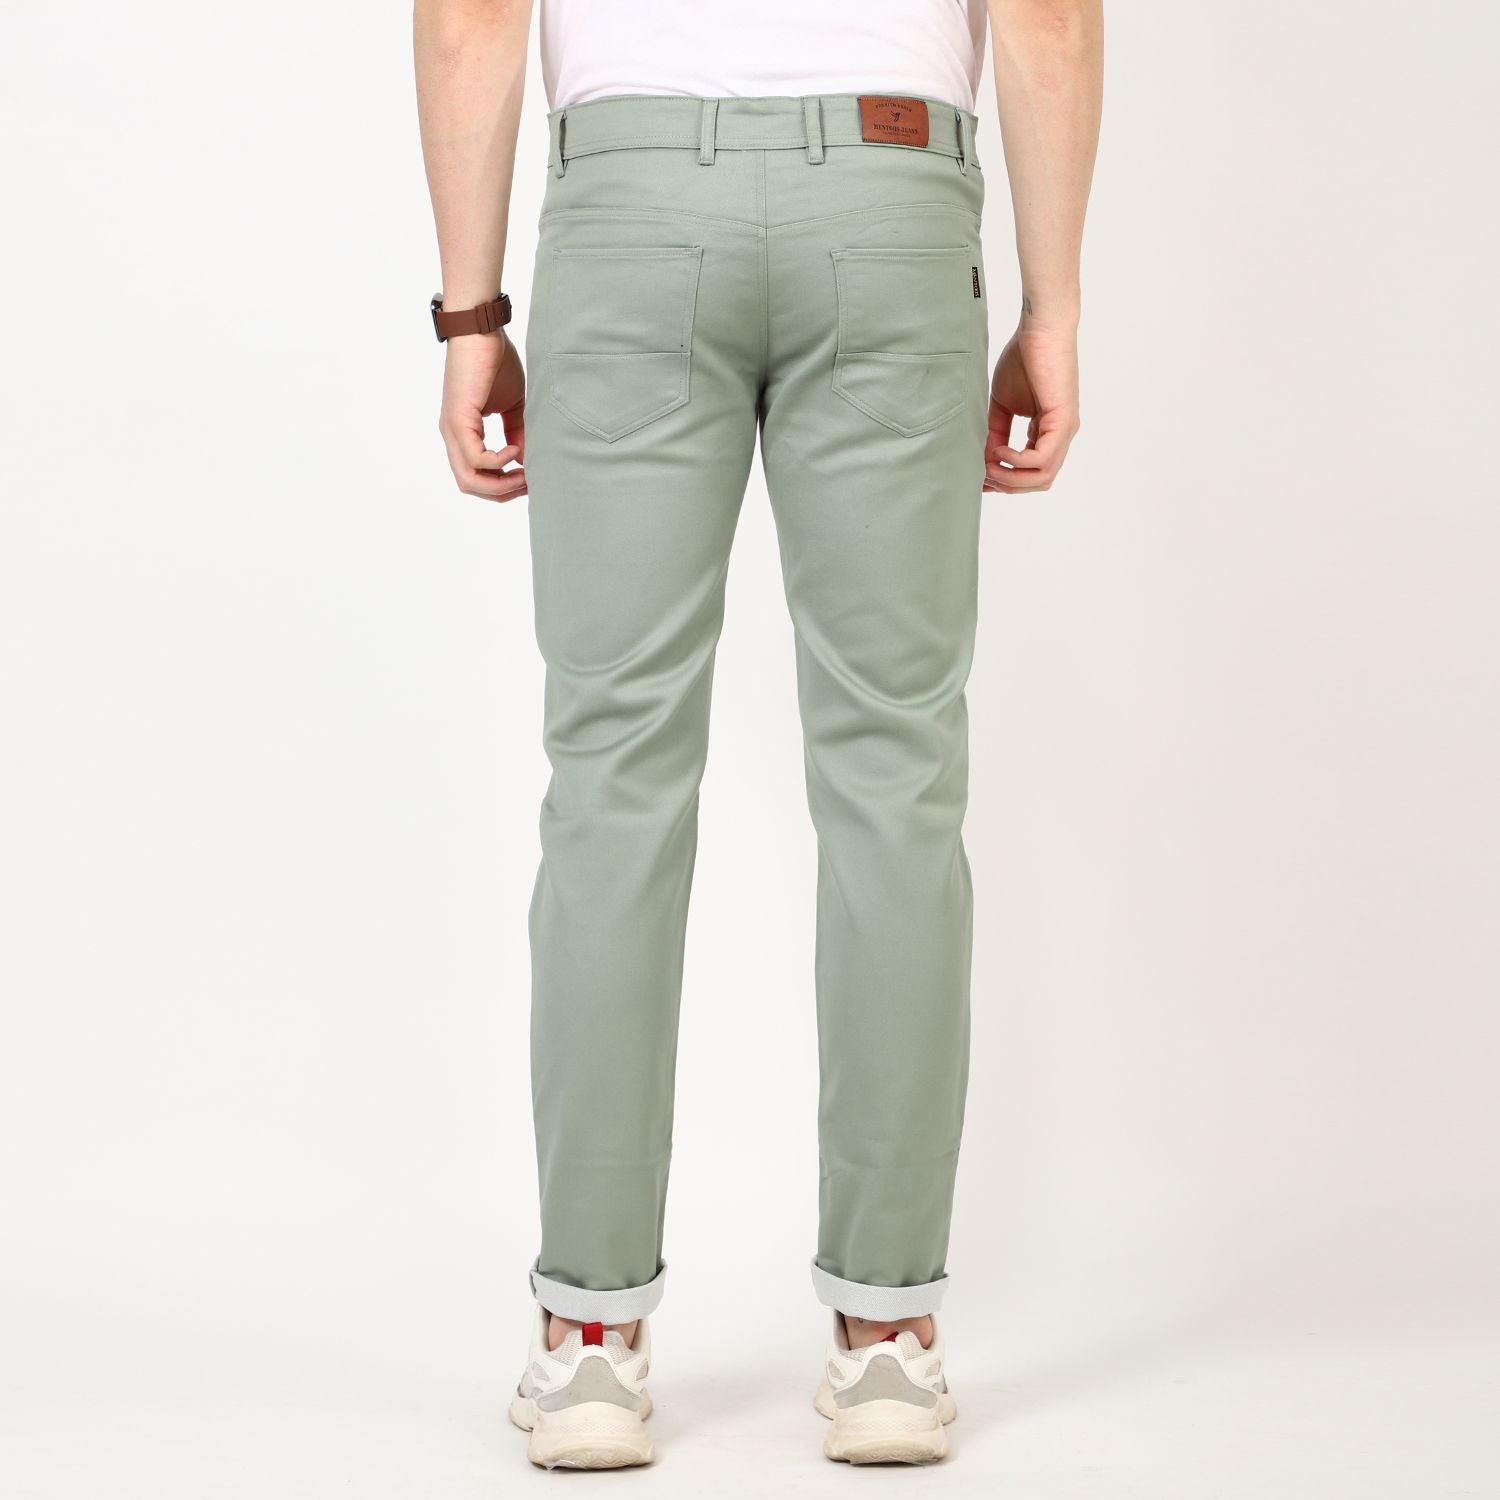 Slim fit flat front trouser Olive Green